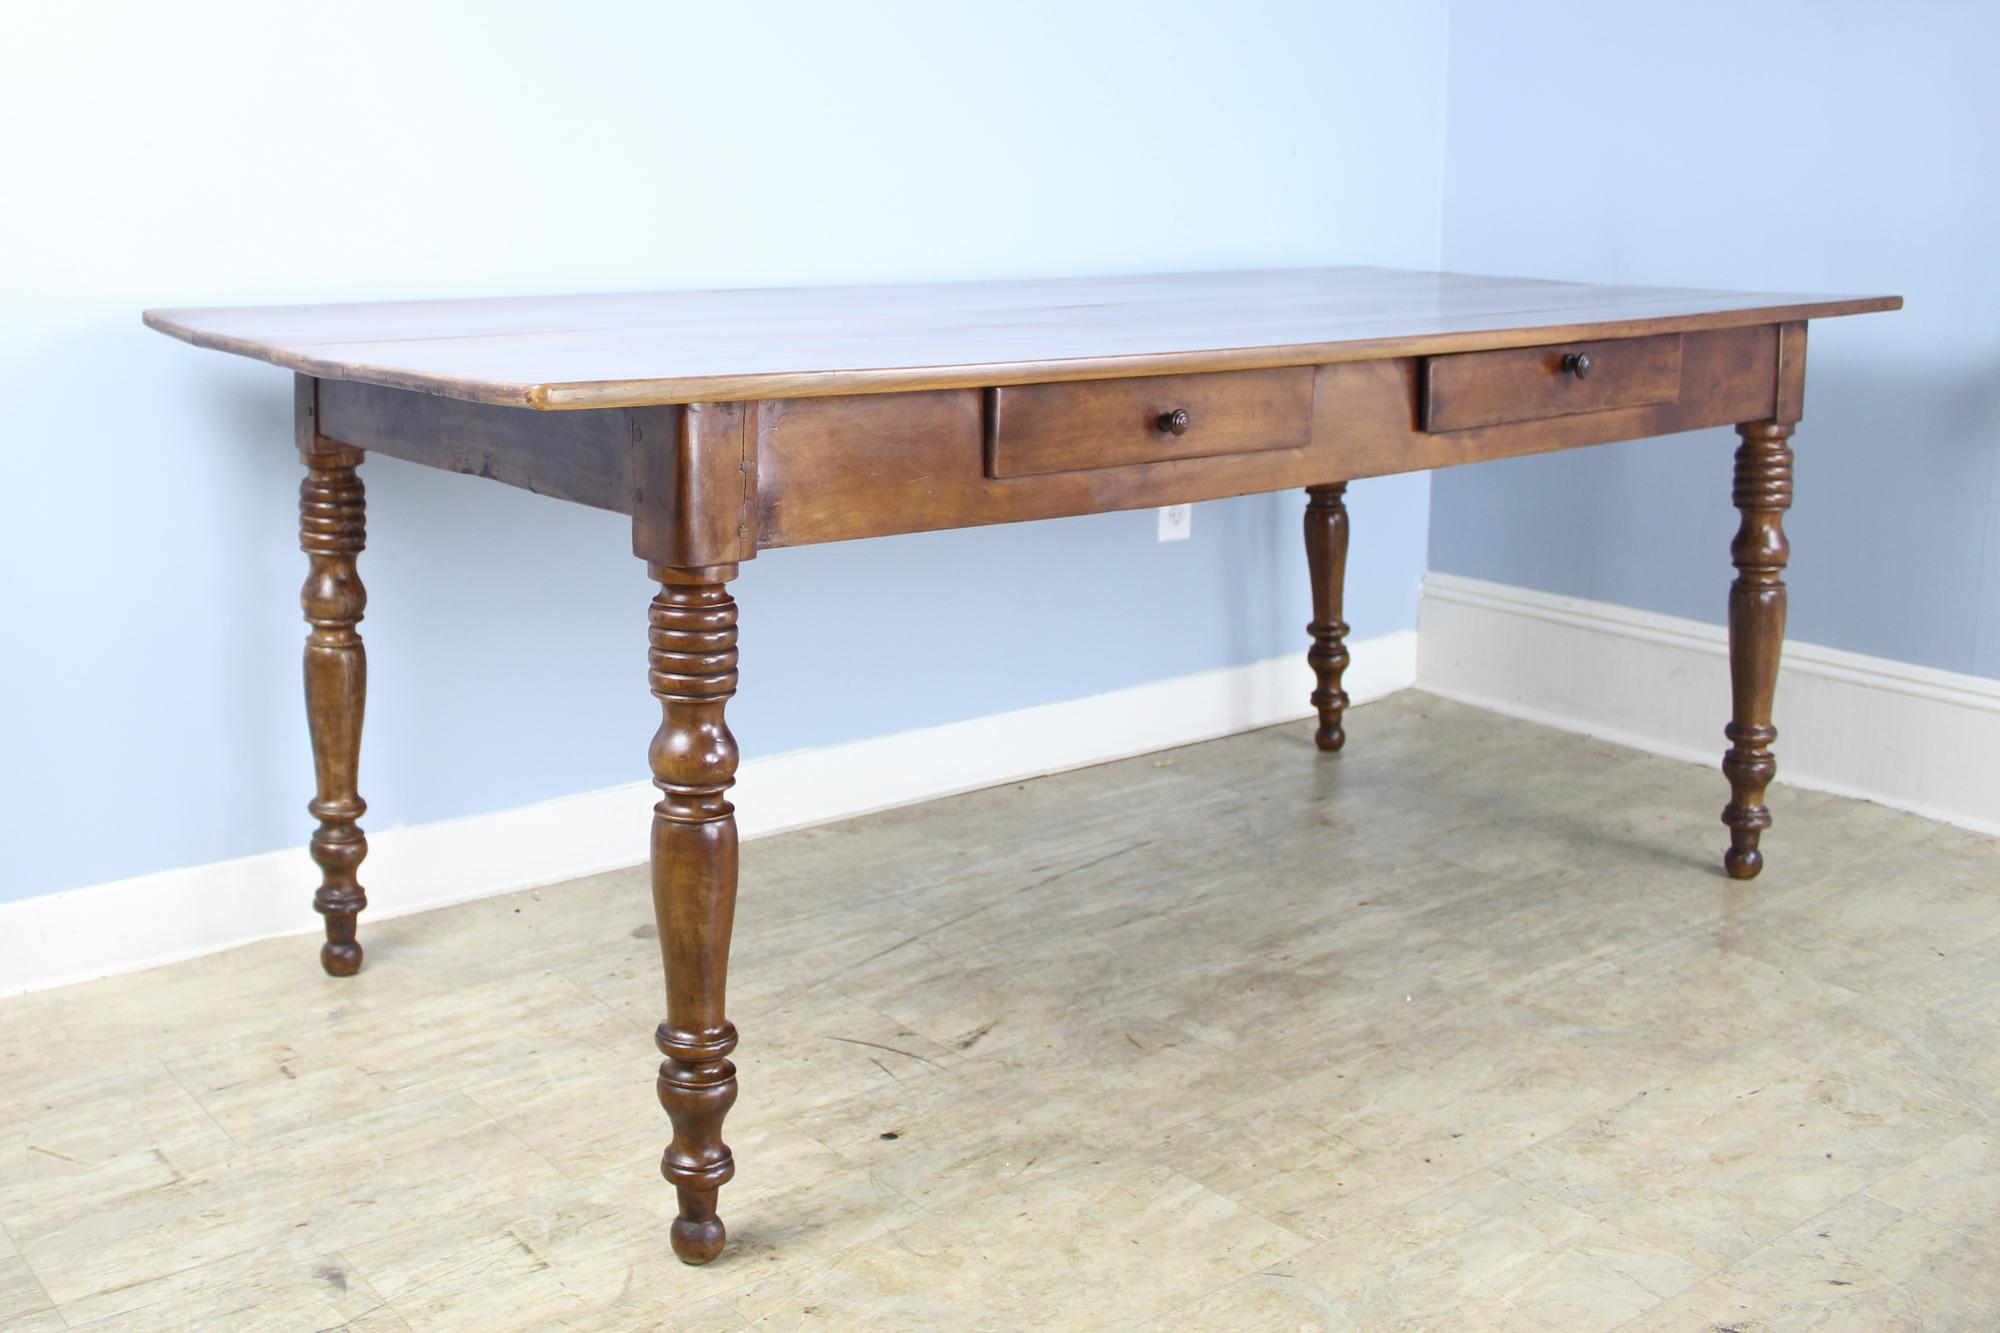 A smaller fruitwood farm table with glossy turned legs and a glorious glowing top. The two drawers in the apron add a note of visual flare and provide some handy storage. There are some small areas of old wear on the top, seen in image #9. 24 in.